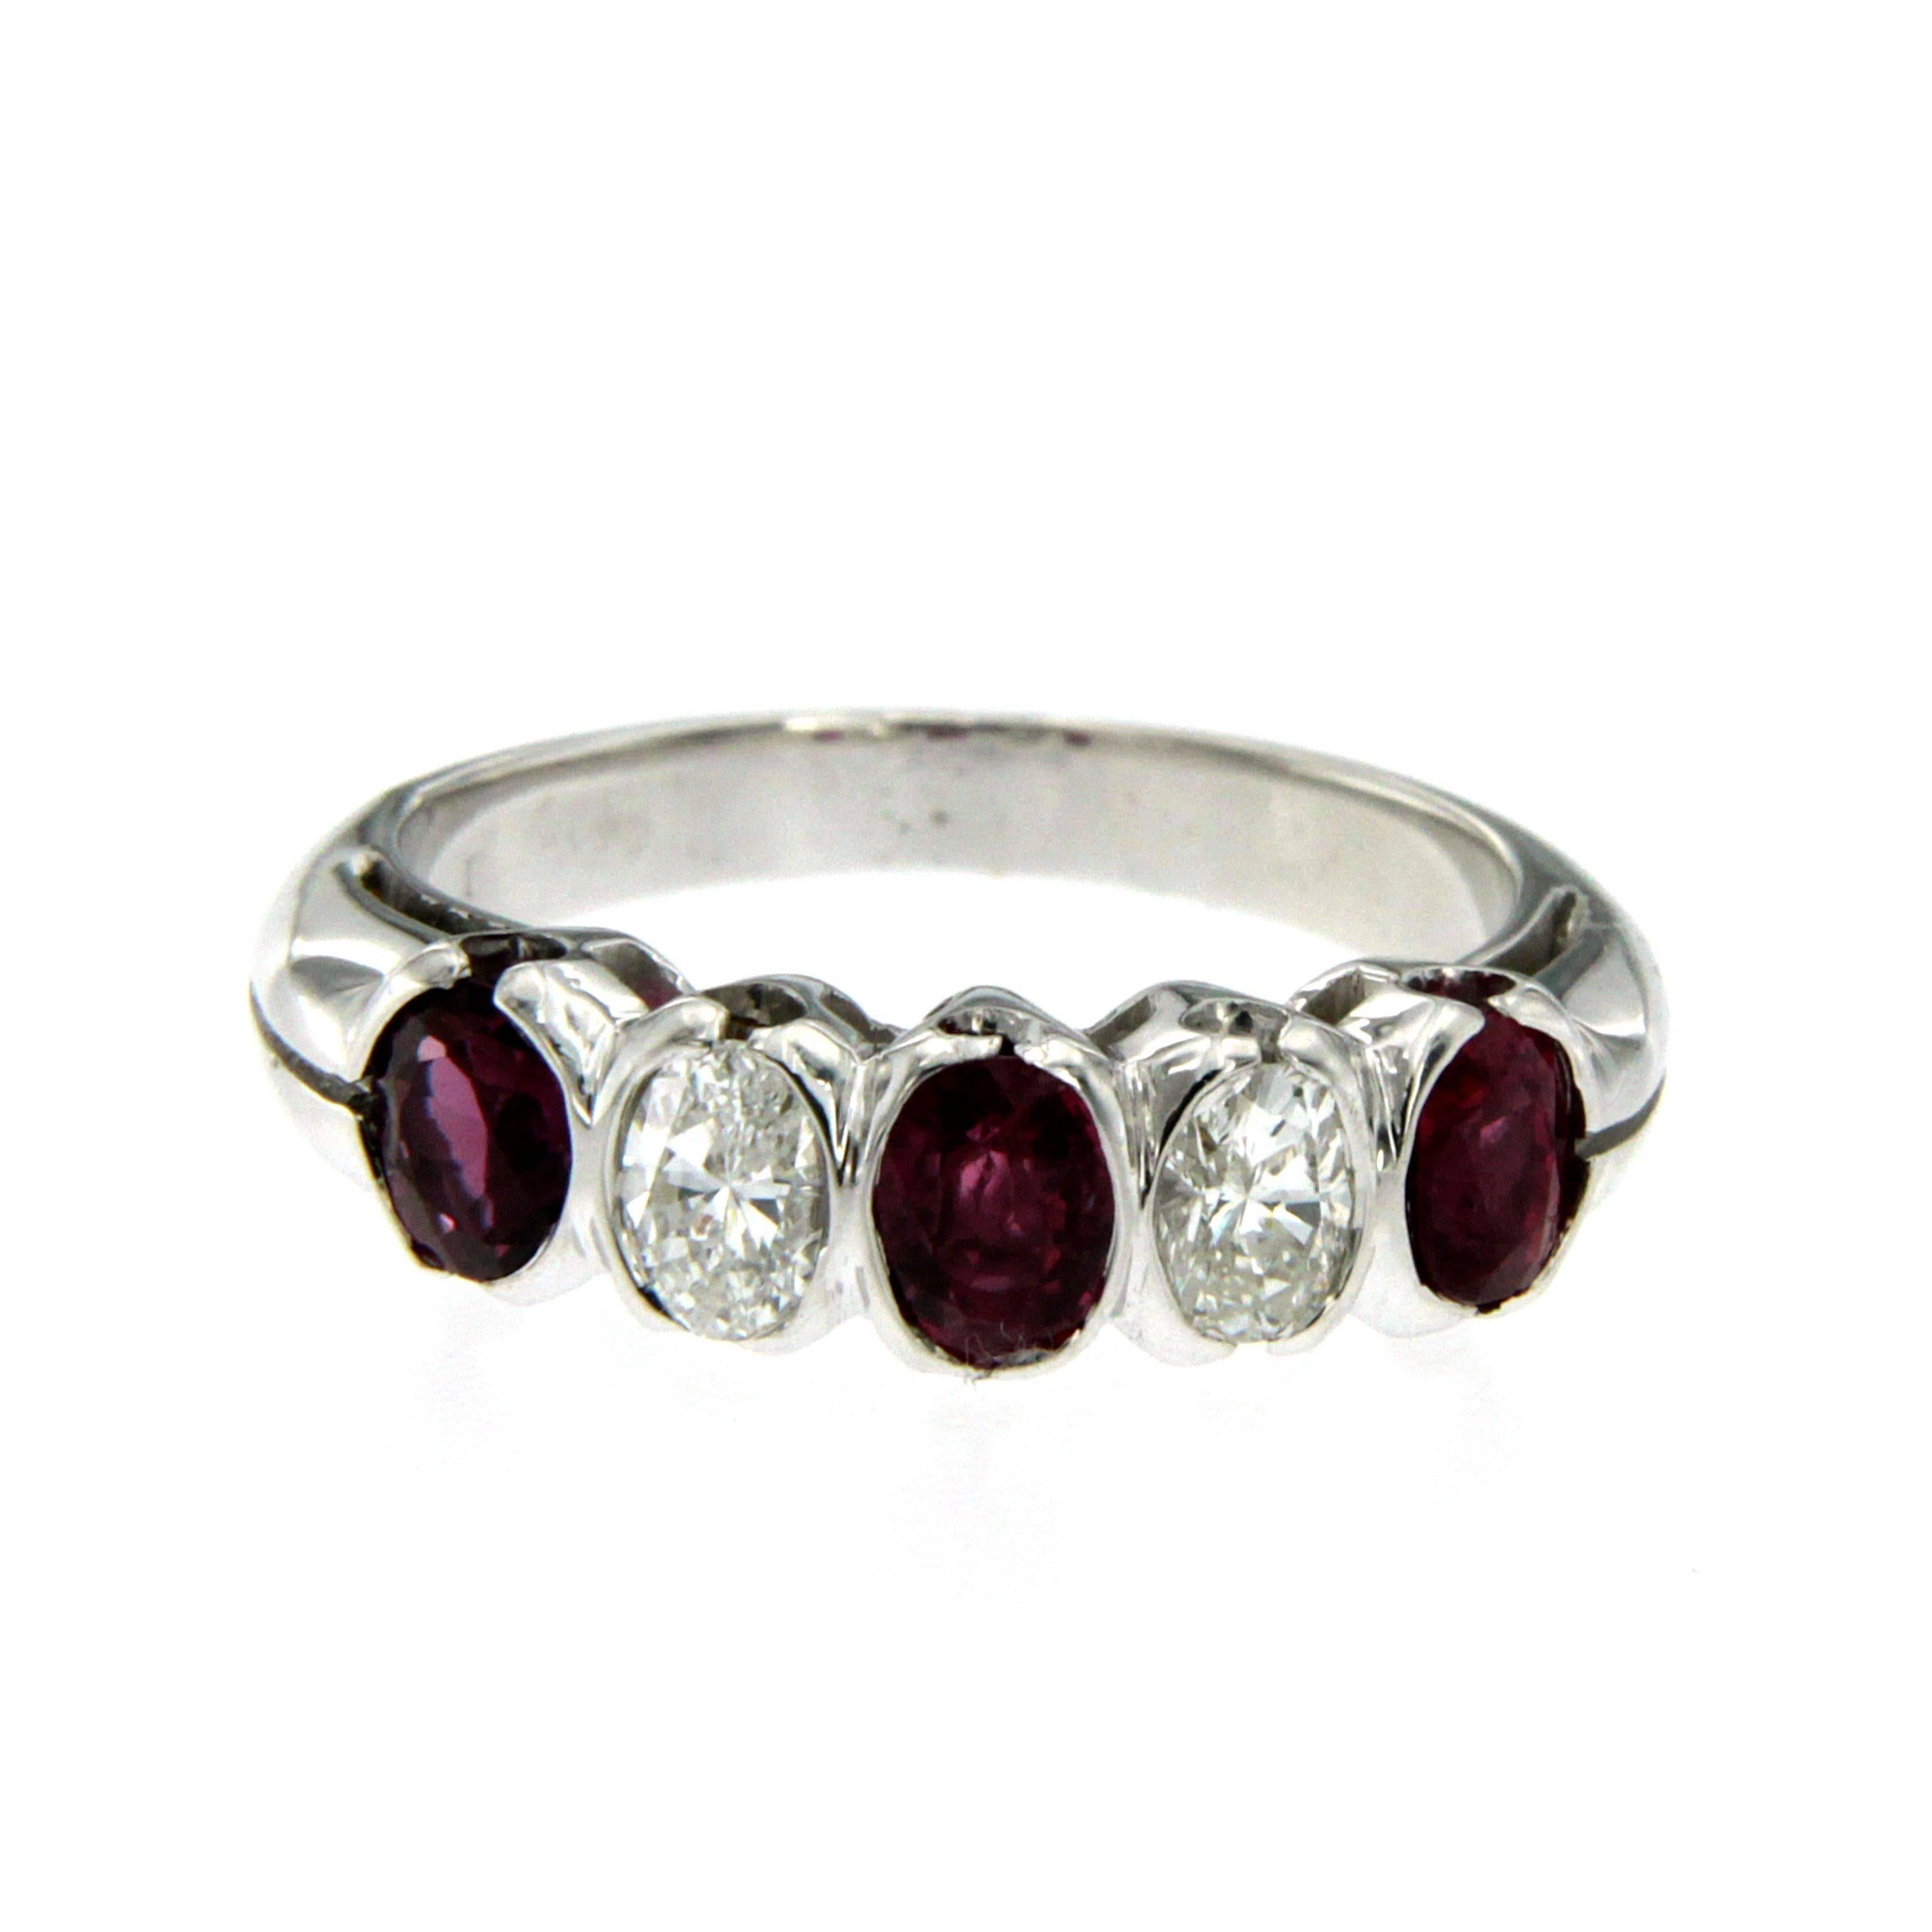 A very fine and impressive diamond band ring fashioned in 18 kt white gold featuring gorgeous alternating oval set diamonds and rubies. 
2 diamonds: approximate total weight of 0.50 ct. Color: G, Clarity: VS1
3 rubies: approximate total weight of